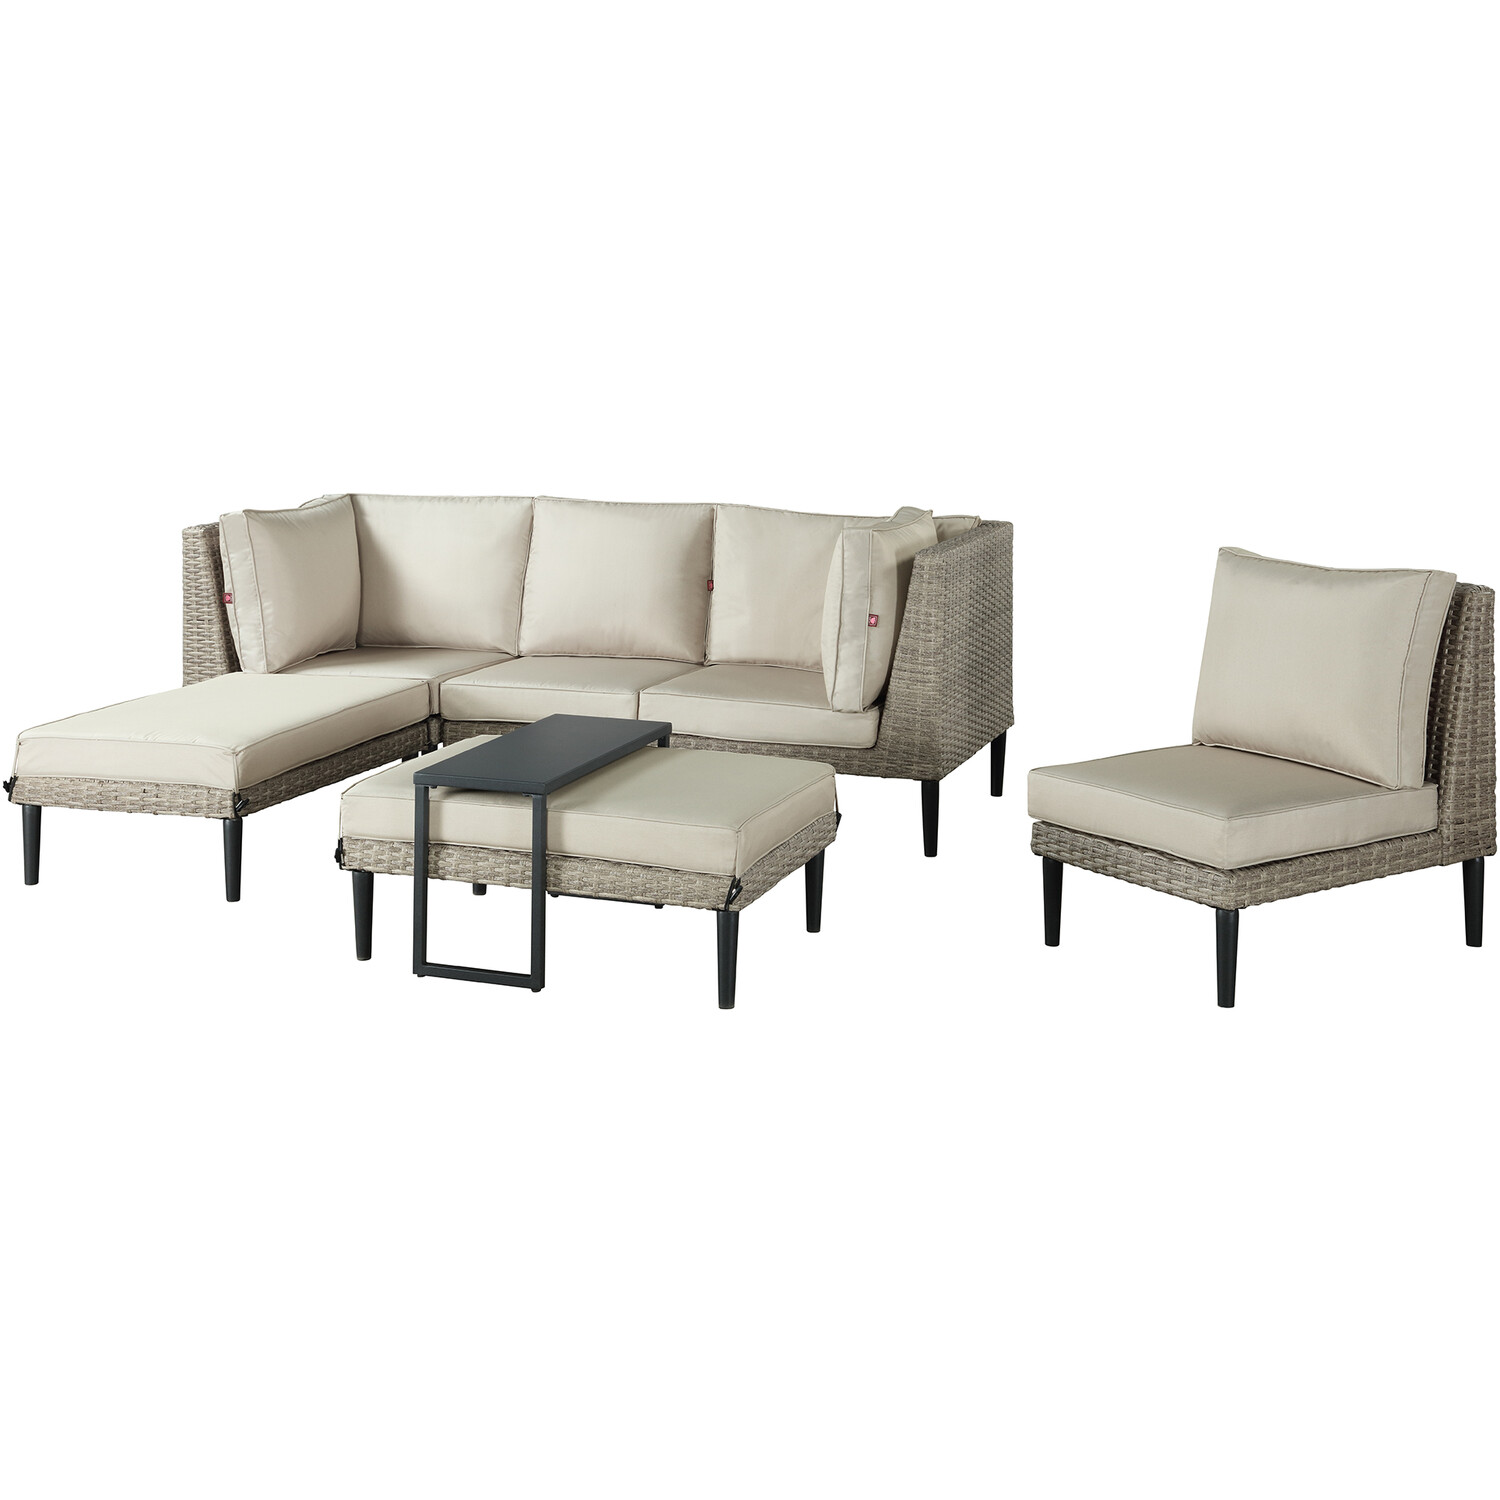 Malay Clydesdale 6 Seater Modular Sectional Corner Lounge Set Image 5